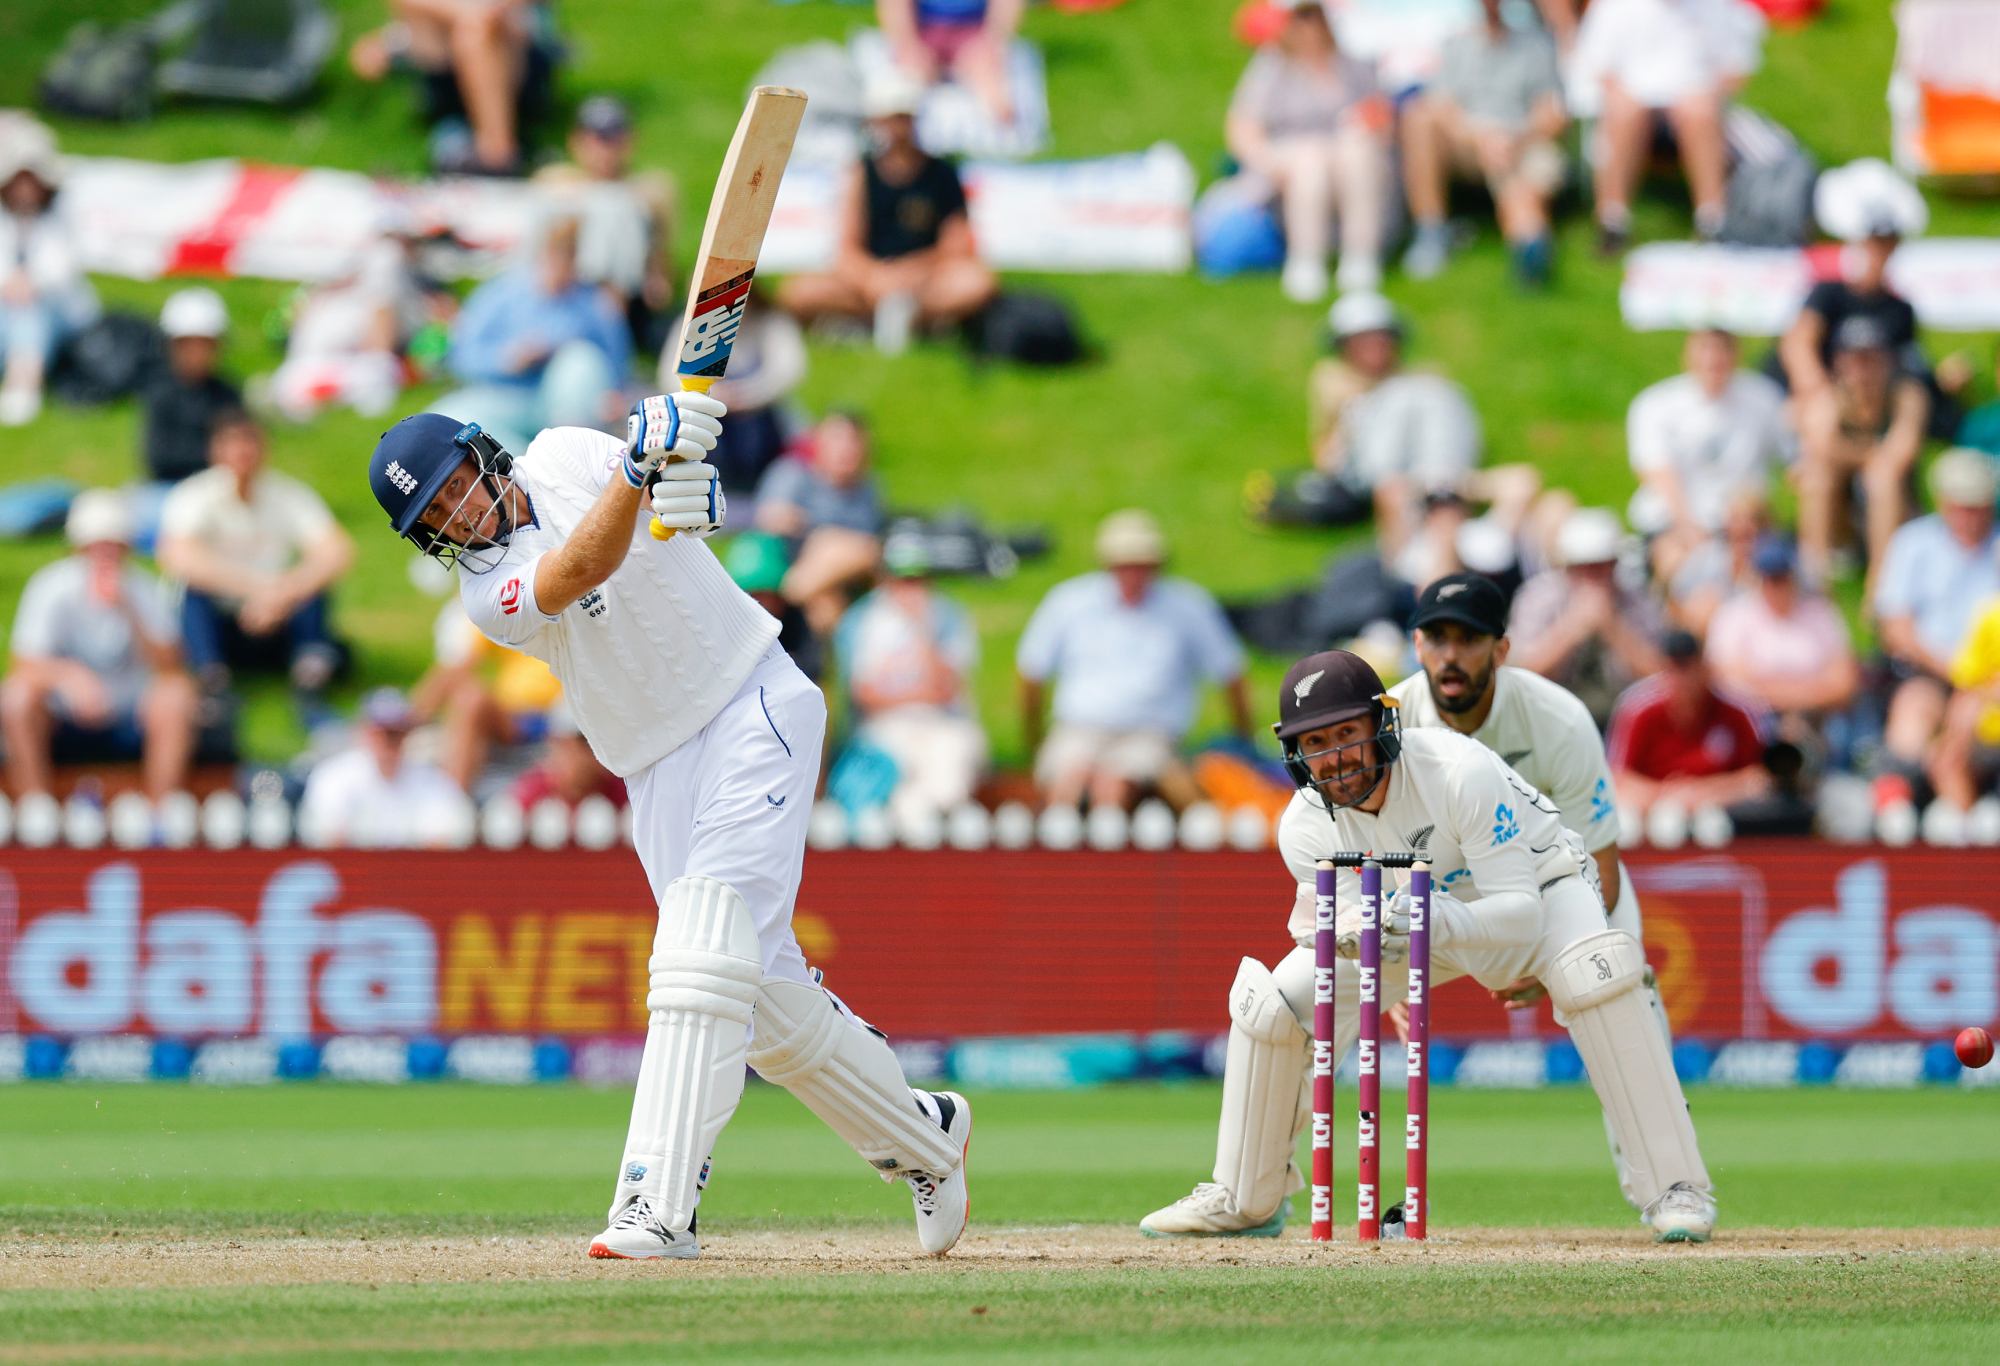 WELLINGTON, NEW ZEALAND - FEBRUARY 28: Joe Root of England bats during day five of the Second Test Match between New Zealand and England at Basin Reserve on February 28, 2023 in Wellington, New Zealand. (Photo by Hagen Hopkins/Getty Images)